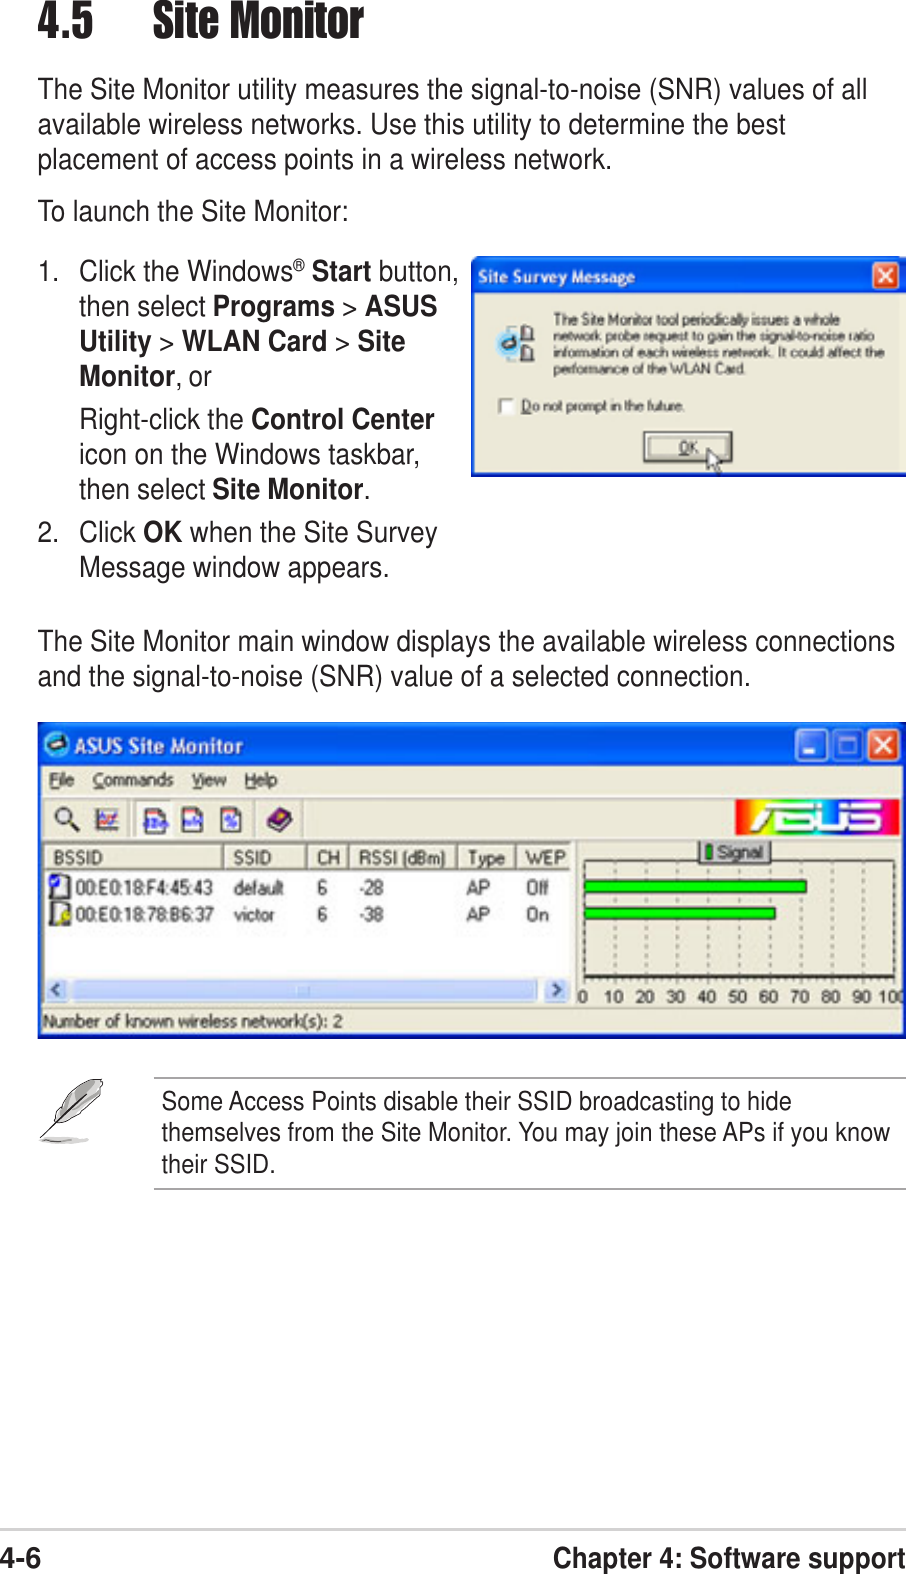 4-6Chapter 4: Software support4.5 Site MonitorThe Site Monitor utility measures the signal-to-noise (SNR) values of allavailable wireless networks. Use this utility to determine the bestplacement of access points in a wireless network.To launch the Site Monitor:1. Click the Windows® Start button,then select Programs &gt; ASUSUtility &gt; WLAN Card &gt; SiteMonitor, orRight-click the Control Centericon on the Windows taskbar,then select Site Monitor.2. Click OK when the Site SurveyMessage window appears.The Site Monitor main window displays the available wireless connectionsand the signal-to-noise (SNR) value of a selected connection.Some Access Points disable their SSID broadcasting to hidethemselves from the Site Monitor. You may join these APs if you knowtheir SSID.